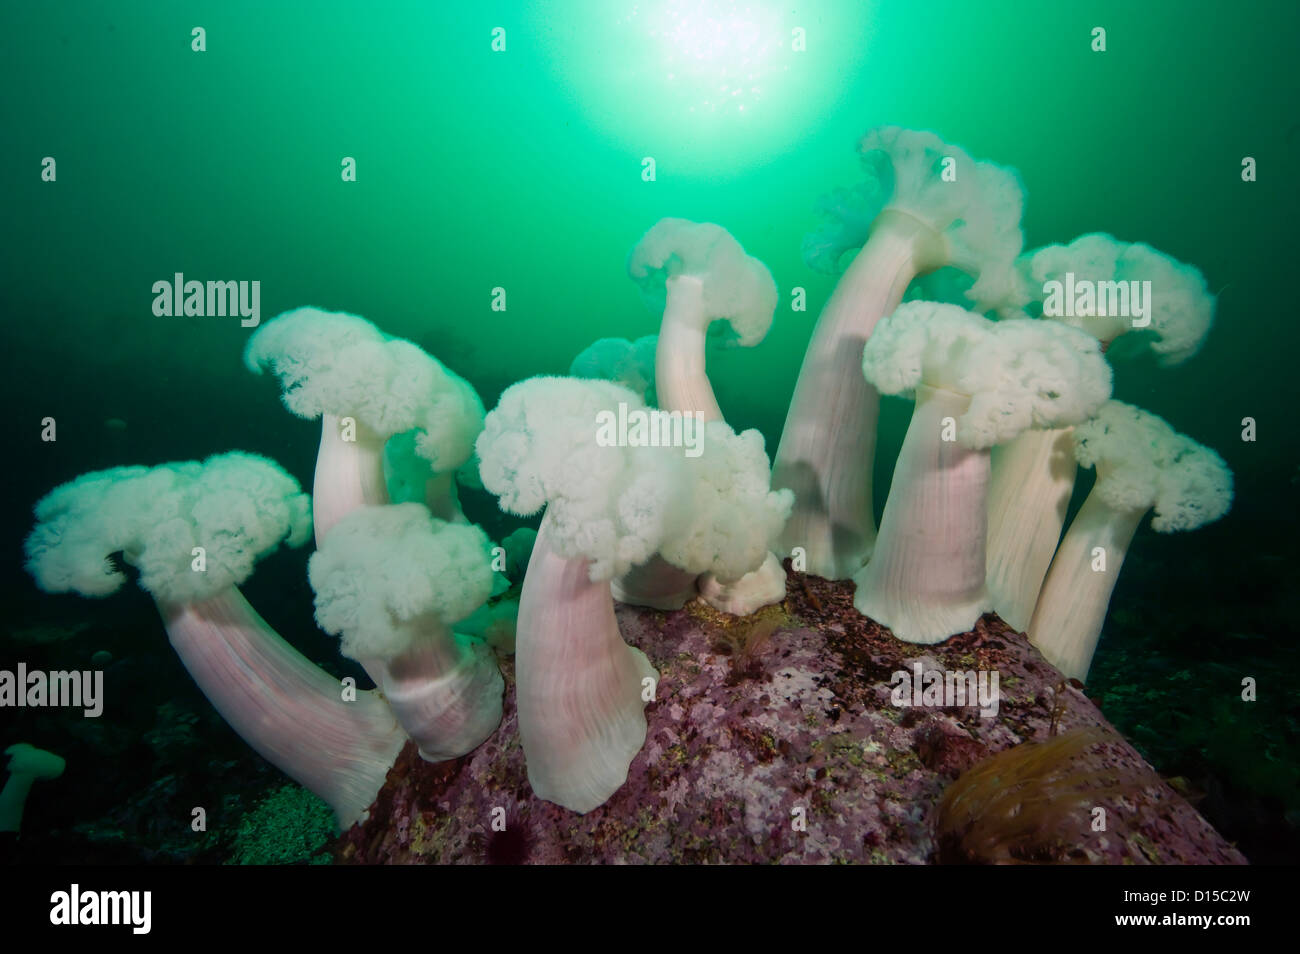 Giant Plumose Anemones, Metridium farcimen, can be found in great abundance in the rocky reefs of Vancouver Island, Canada Stock Photo